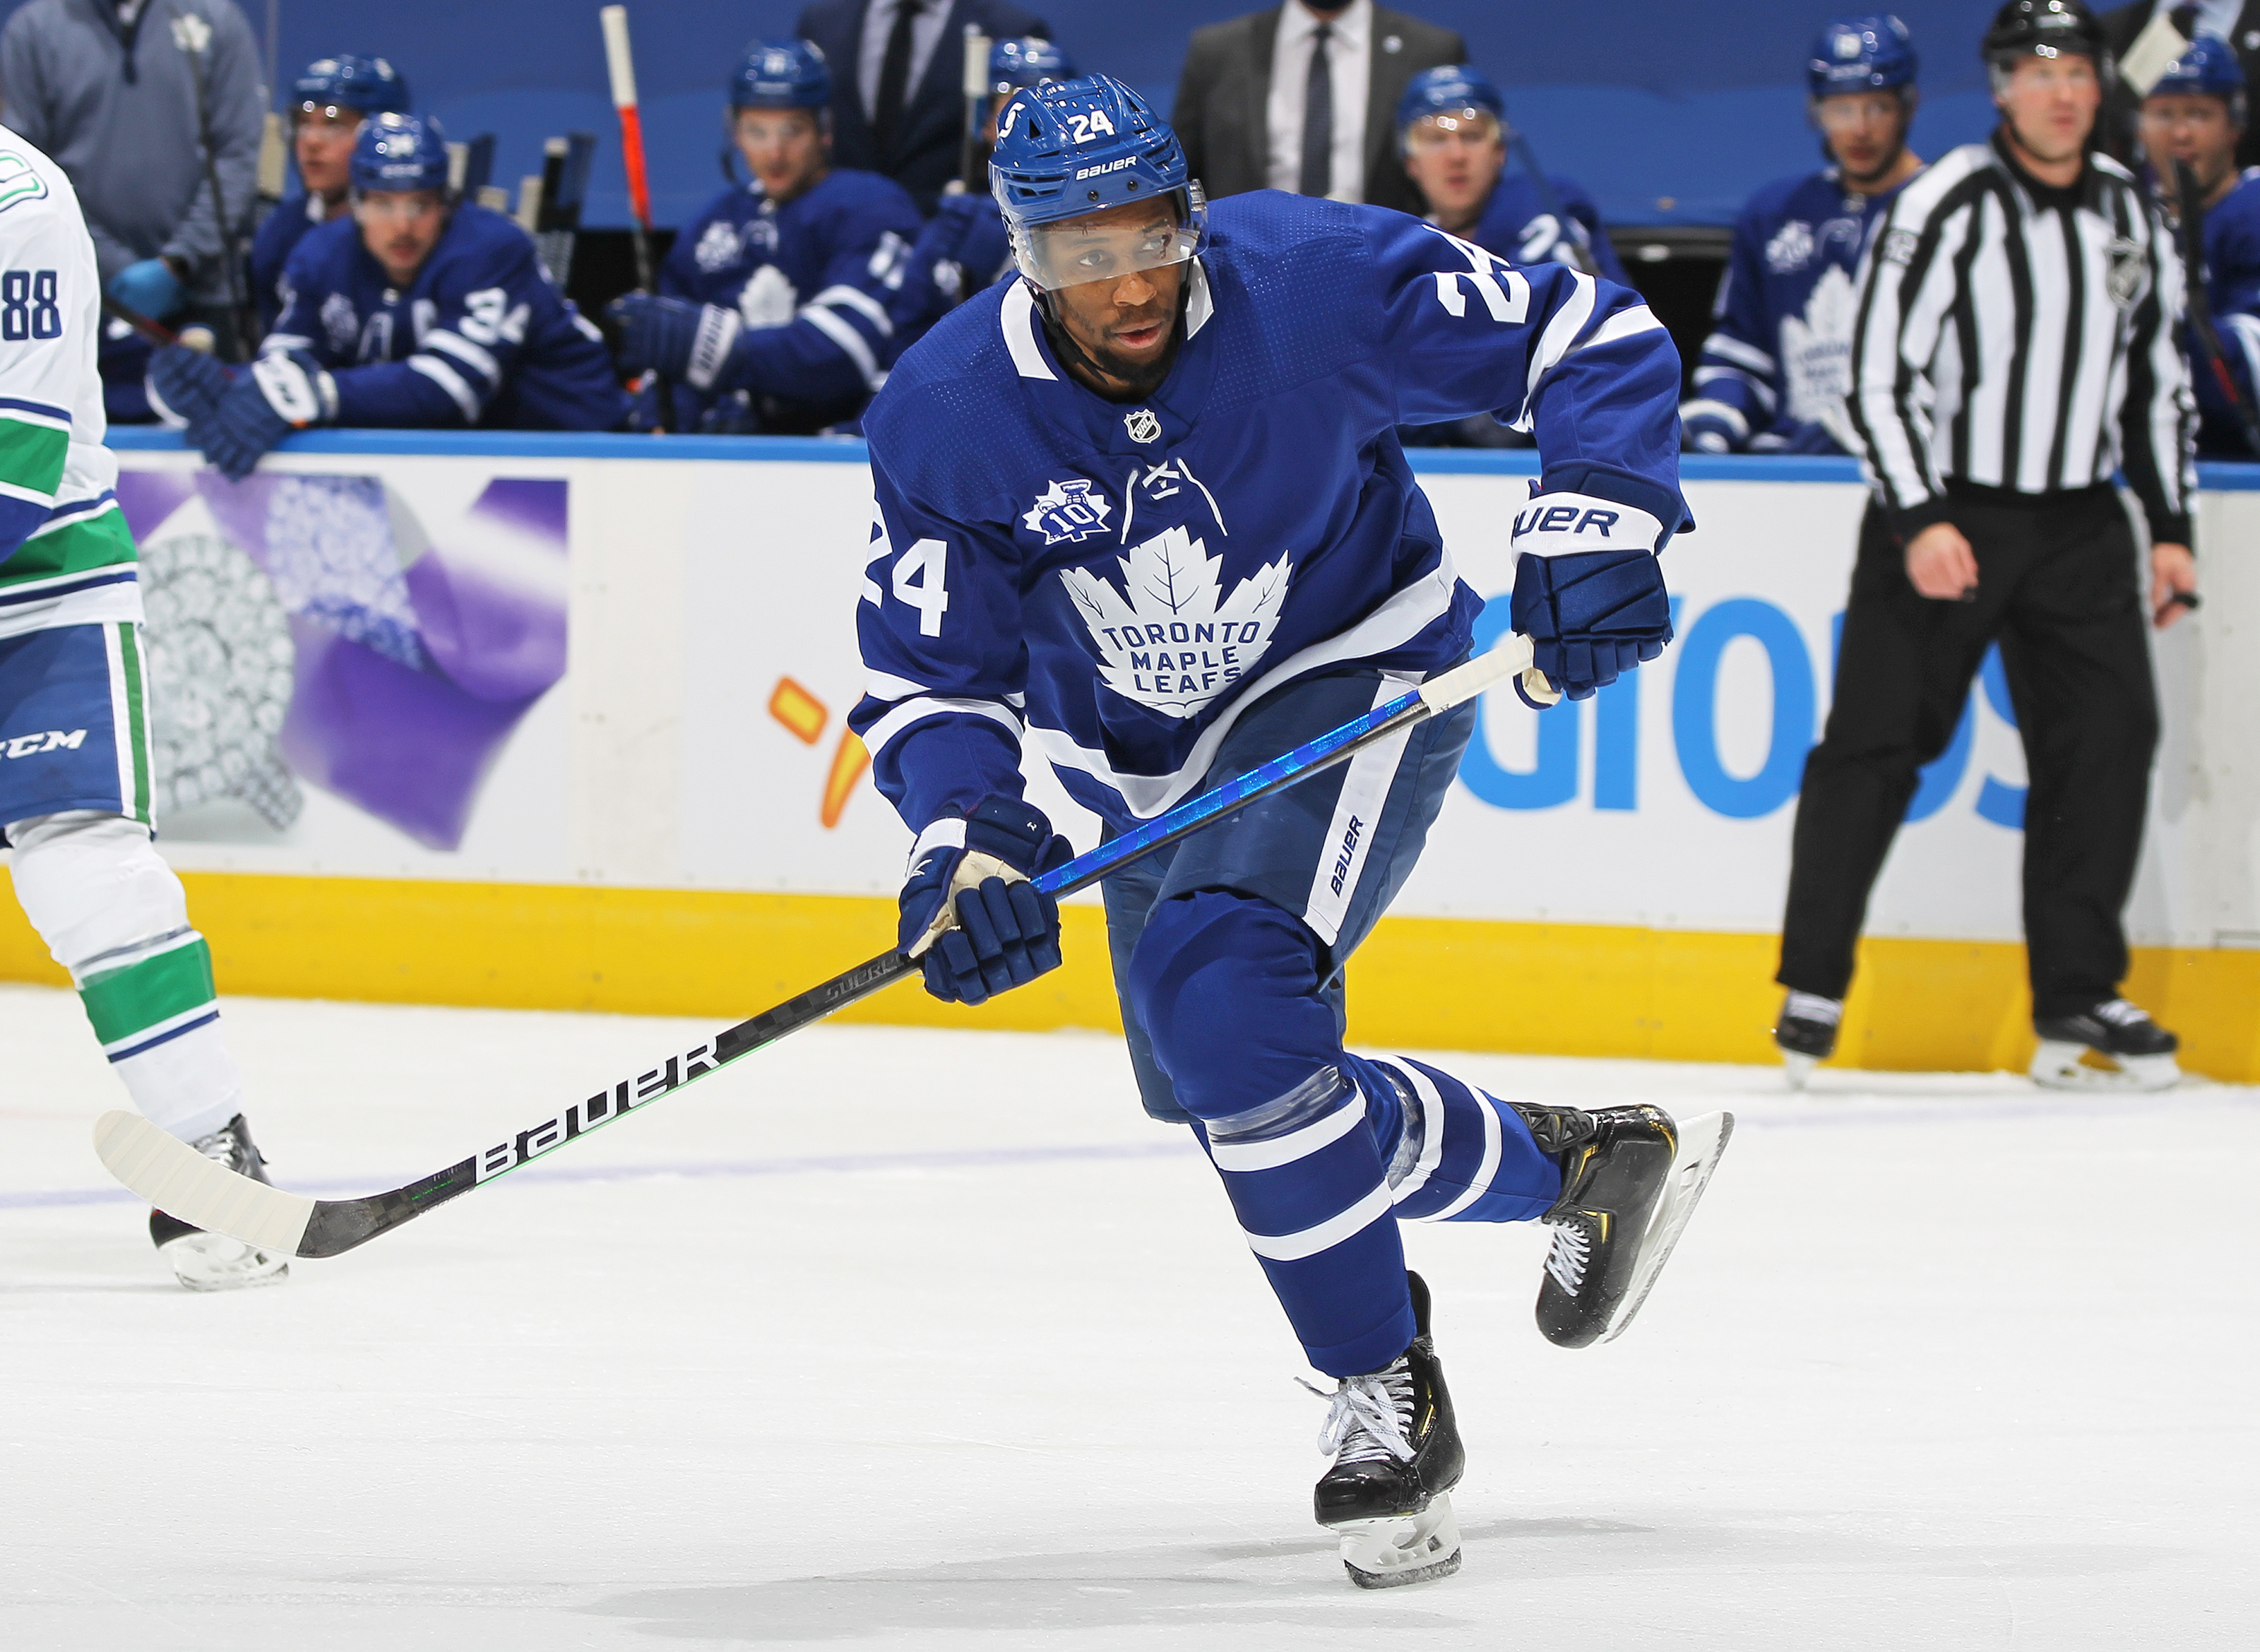 Leafs forward Wayne Simmonds not sure 'if I'd want my kids to play hockey'  with the racism in the sport – Winnipeg Free Press